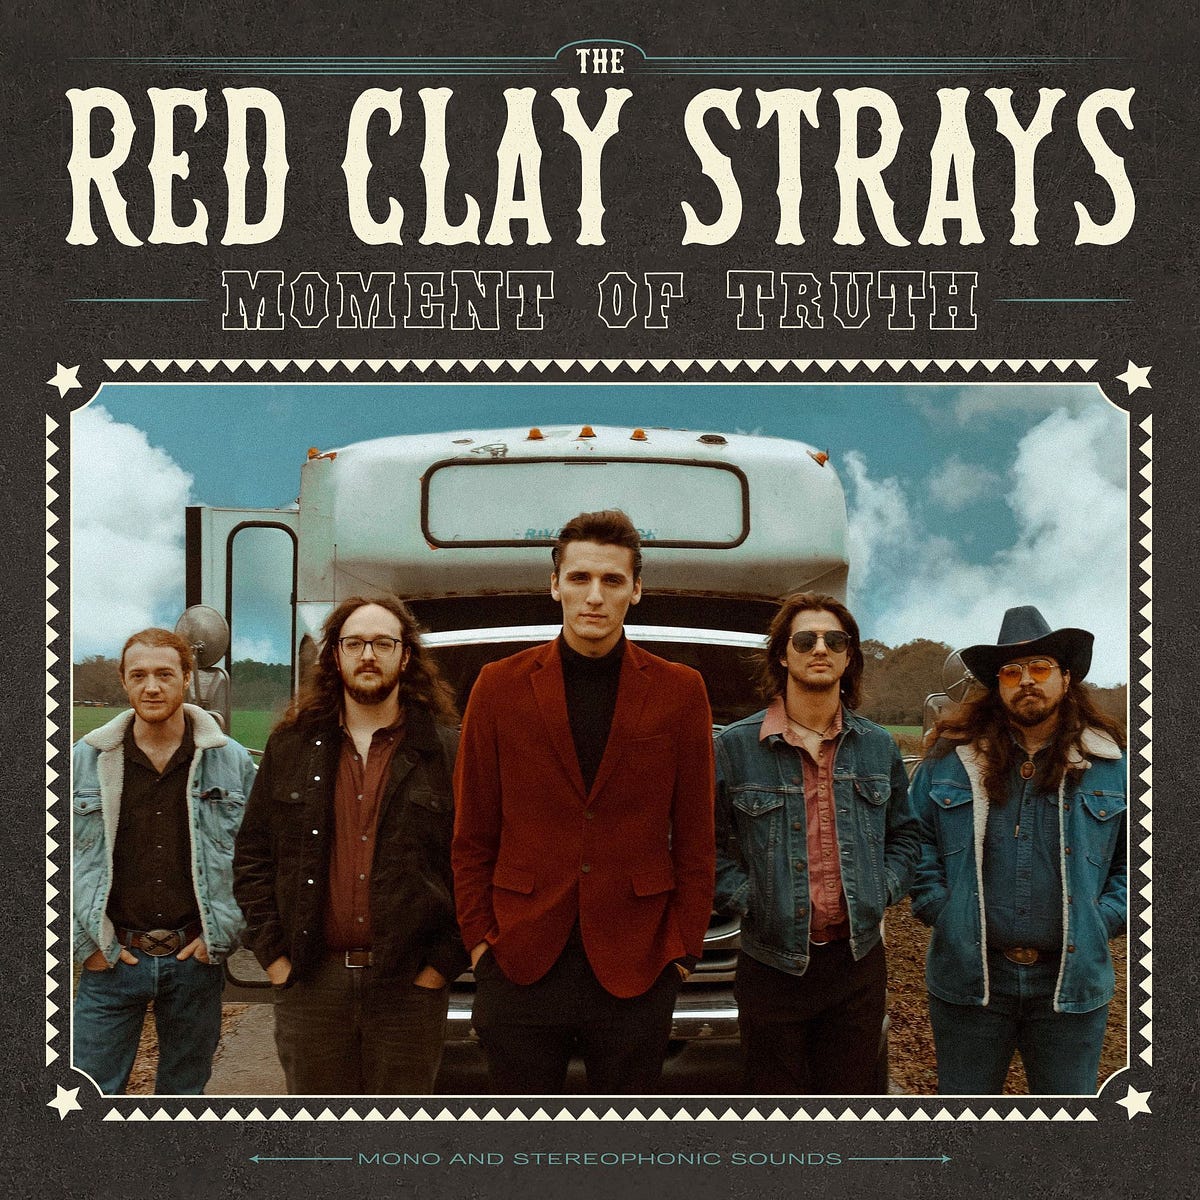 The Red Clay Strays' Album, Moment Of Truth, by Donna Block